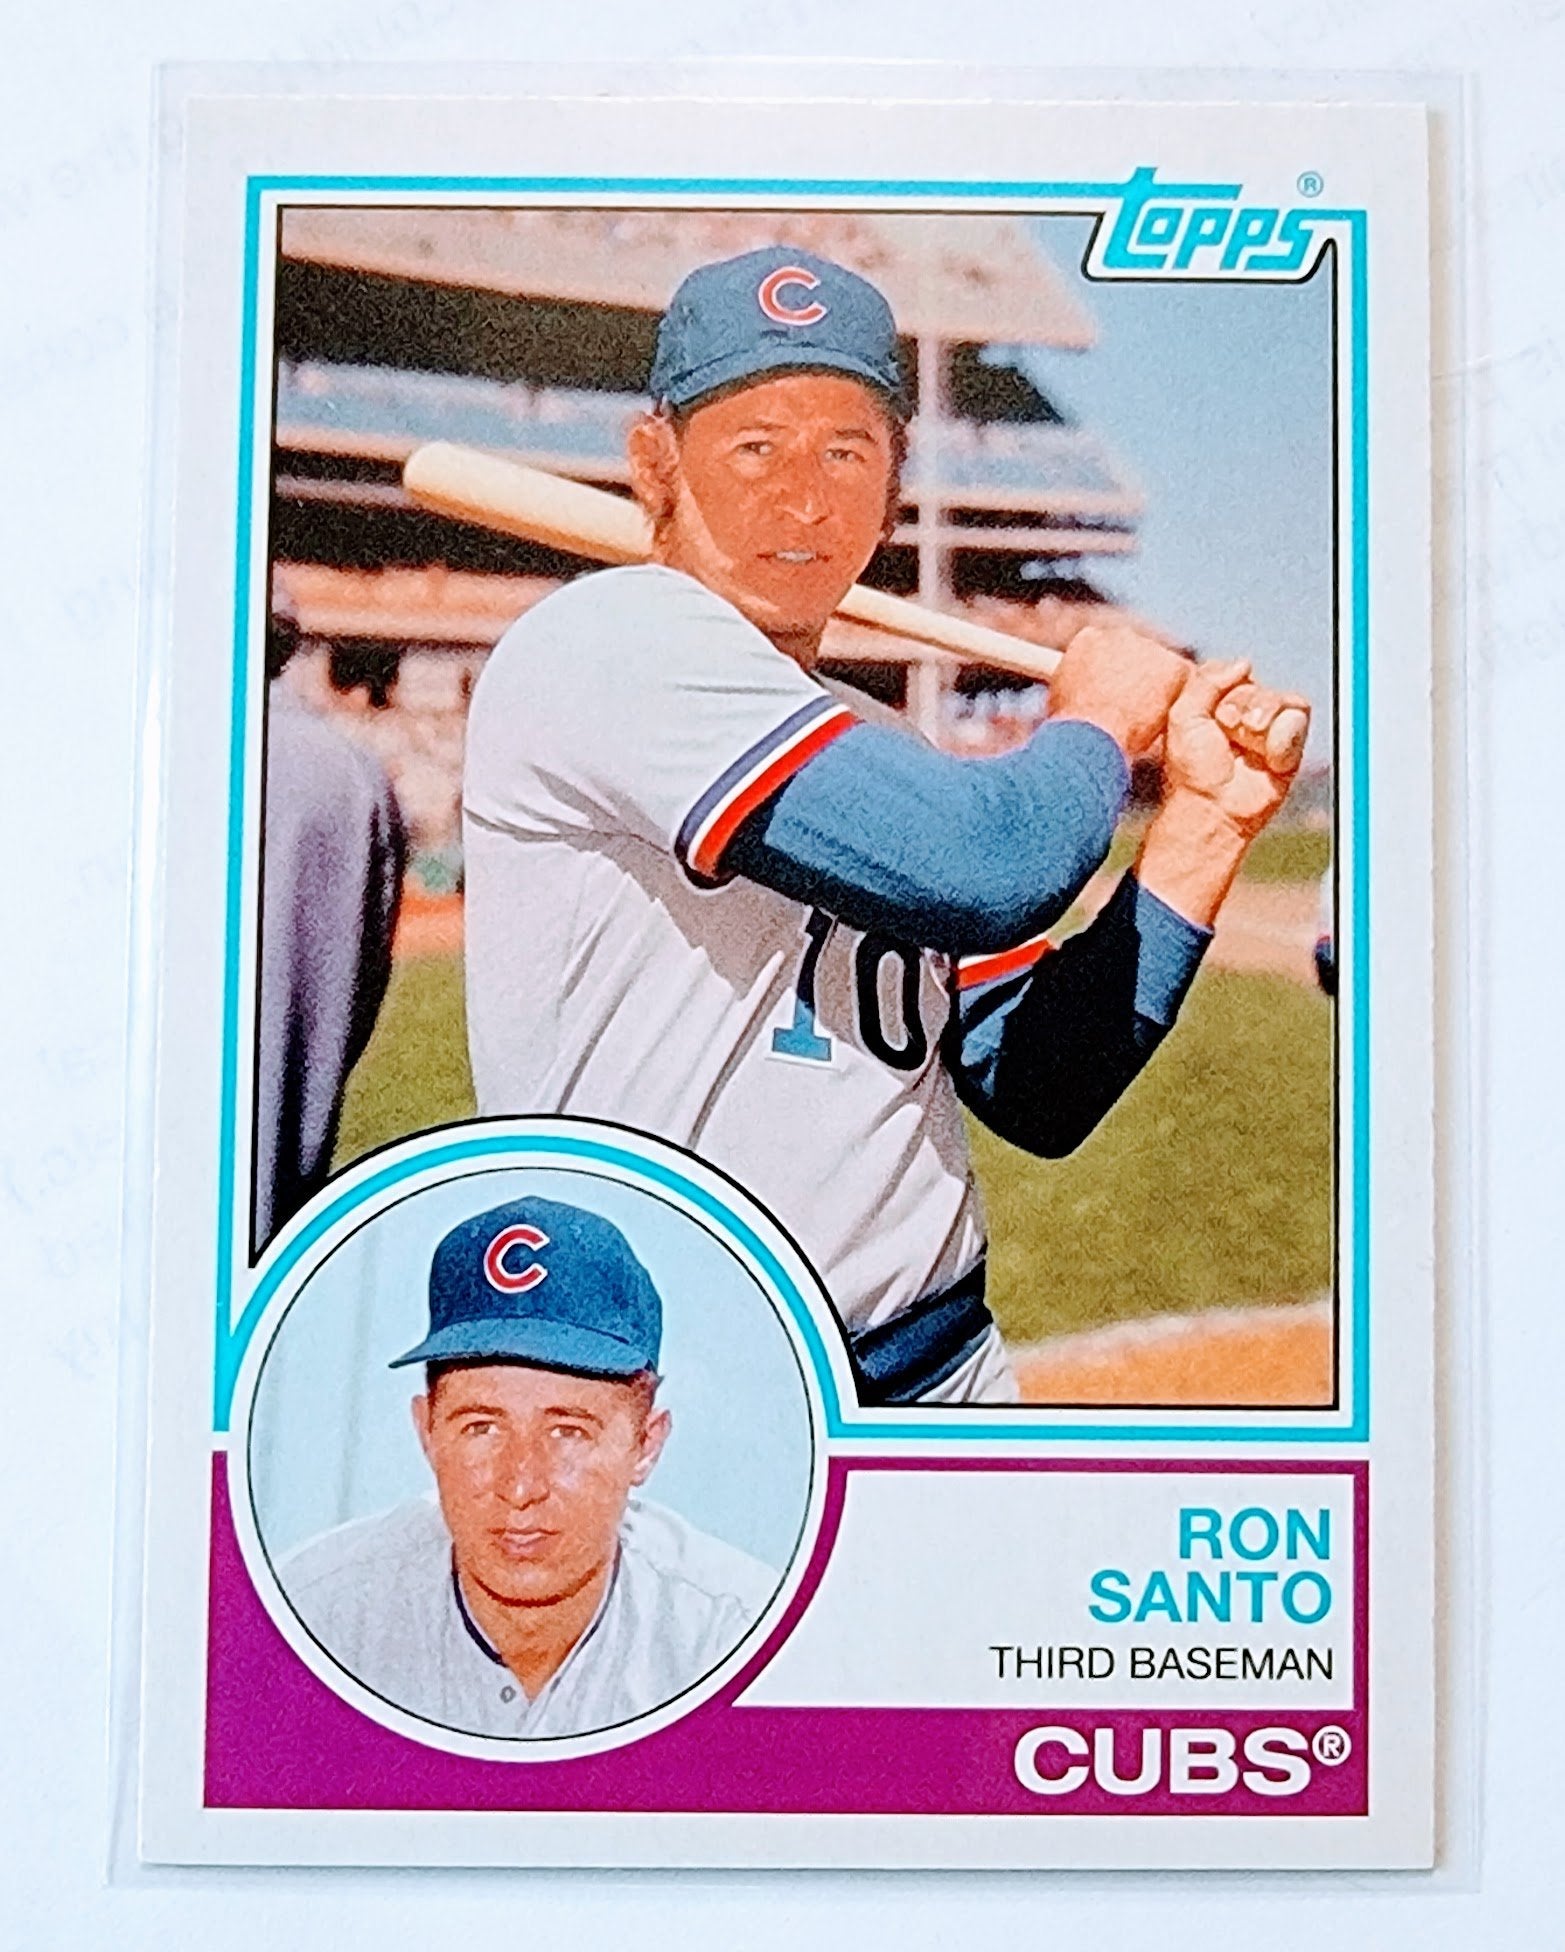 2021 Topps Archives Ron Santos 1983 Baseball Trading Card SMCB1 simple Xclusive Collectibles   